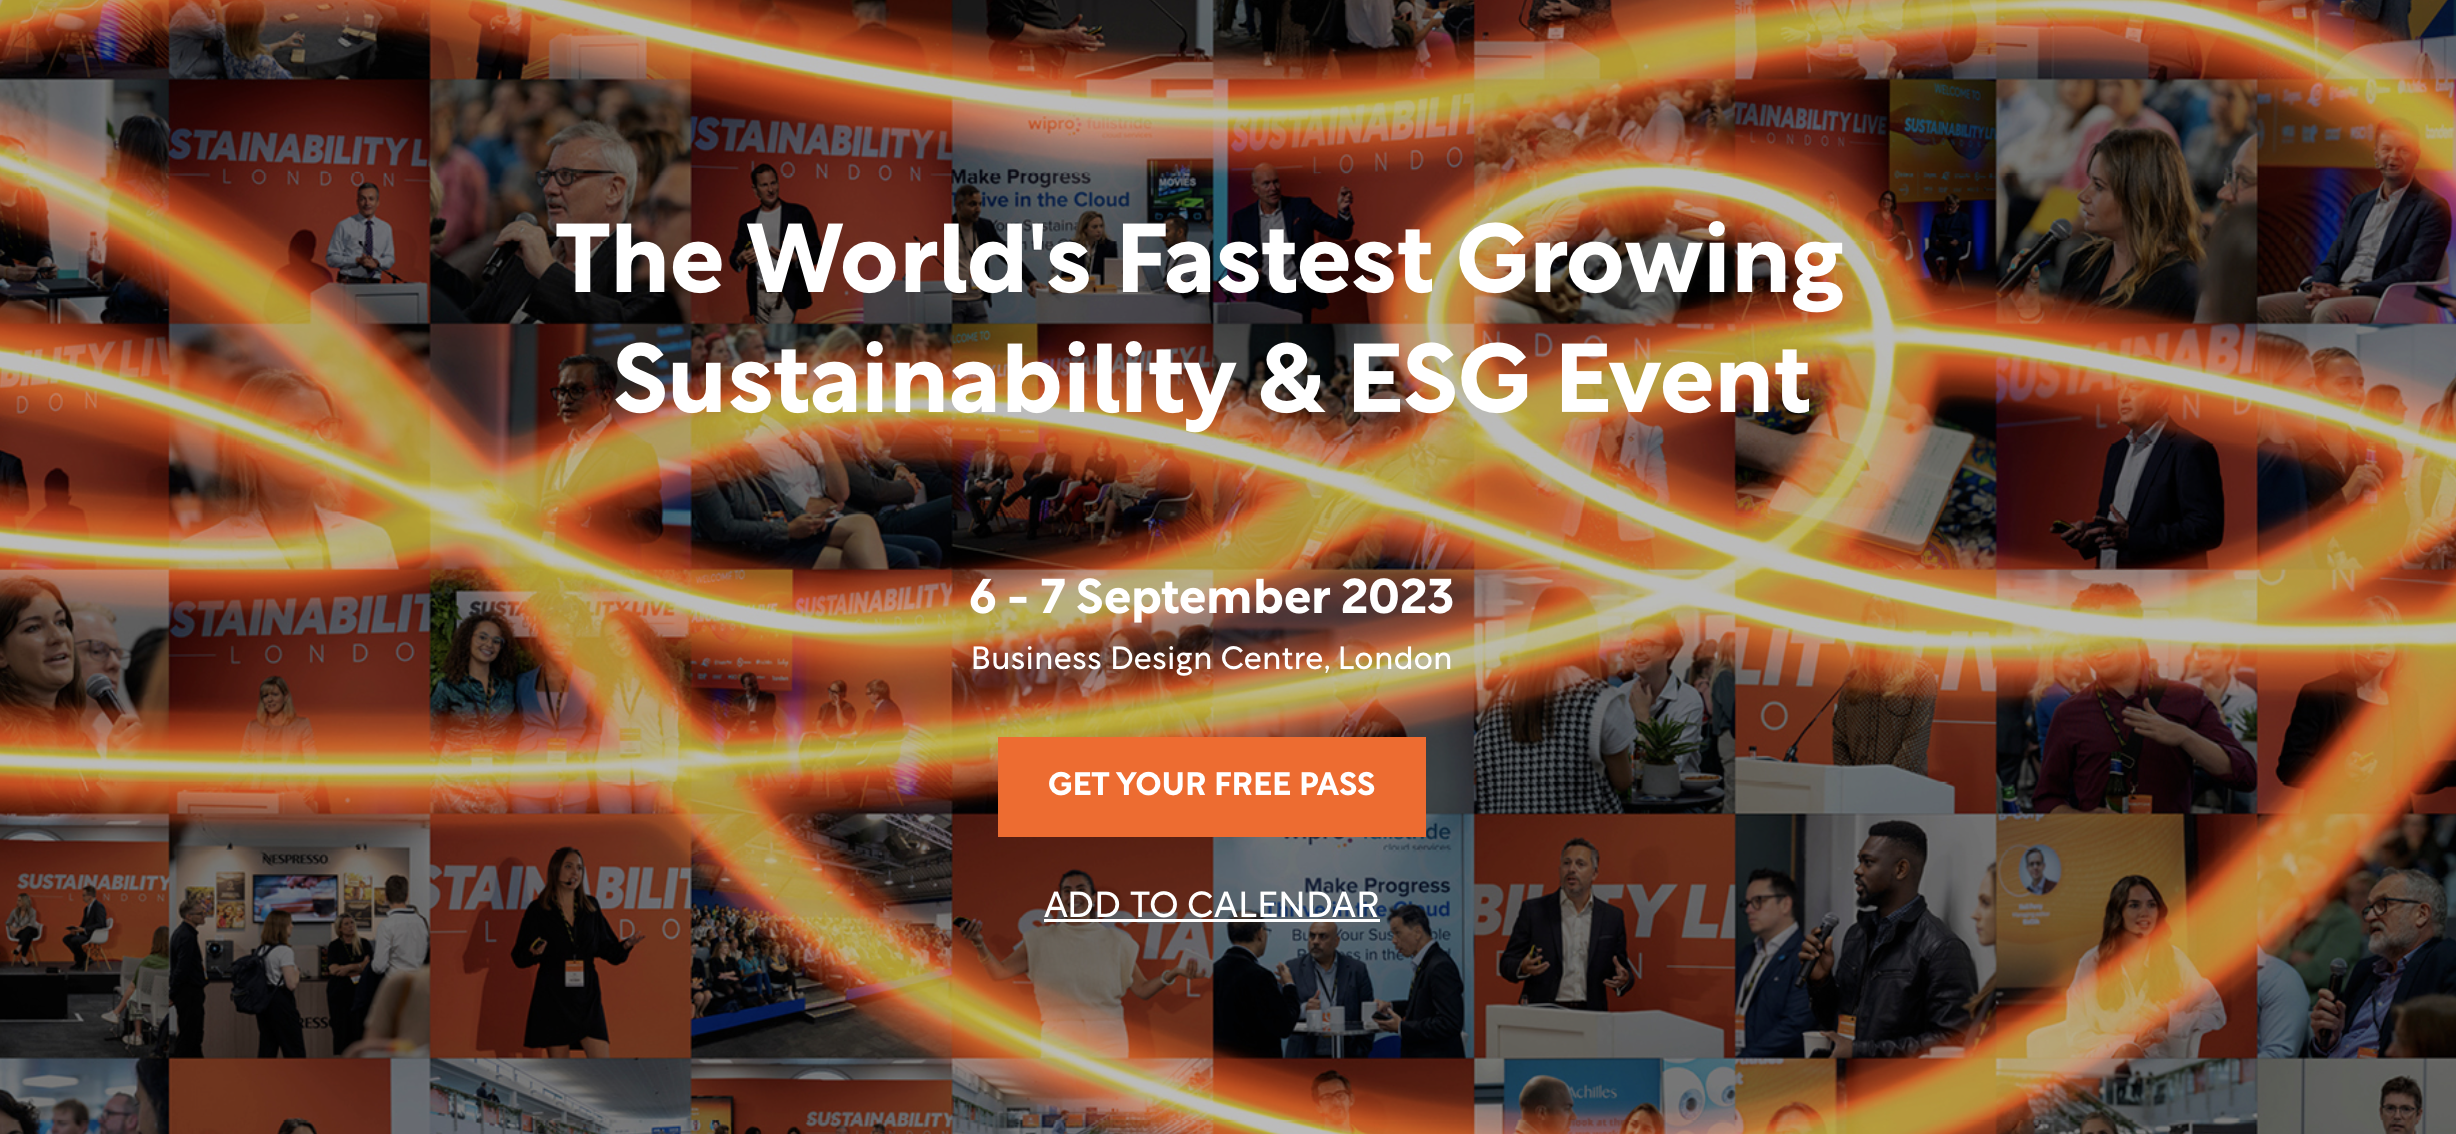 Promotional image for OWL ESG's event, touted as the world's fastest growing sustainability and ESG gathering, featuring the company logo and event details, signifying their leading role in global sustainability initiatives